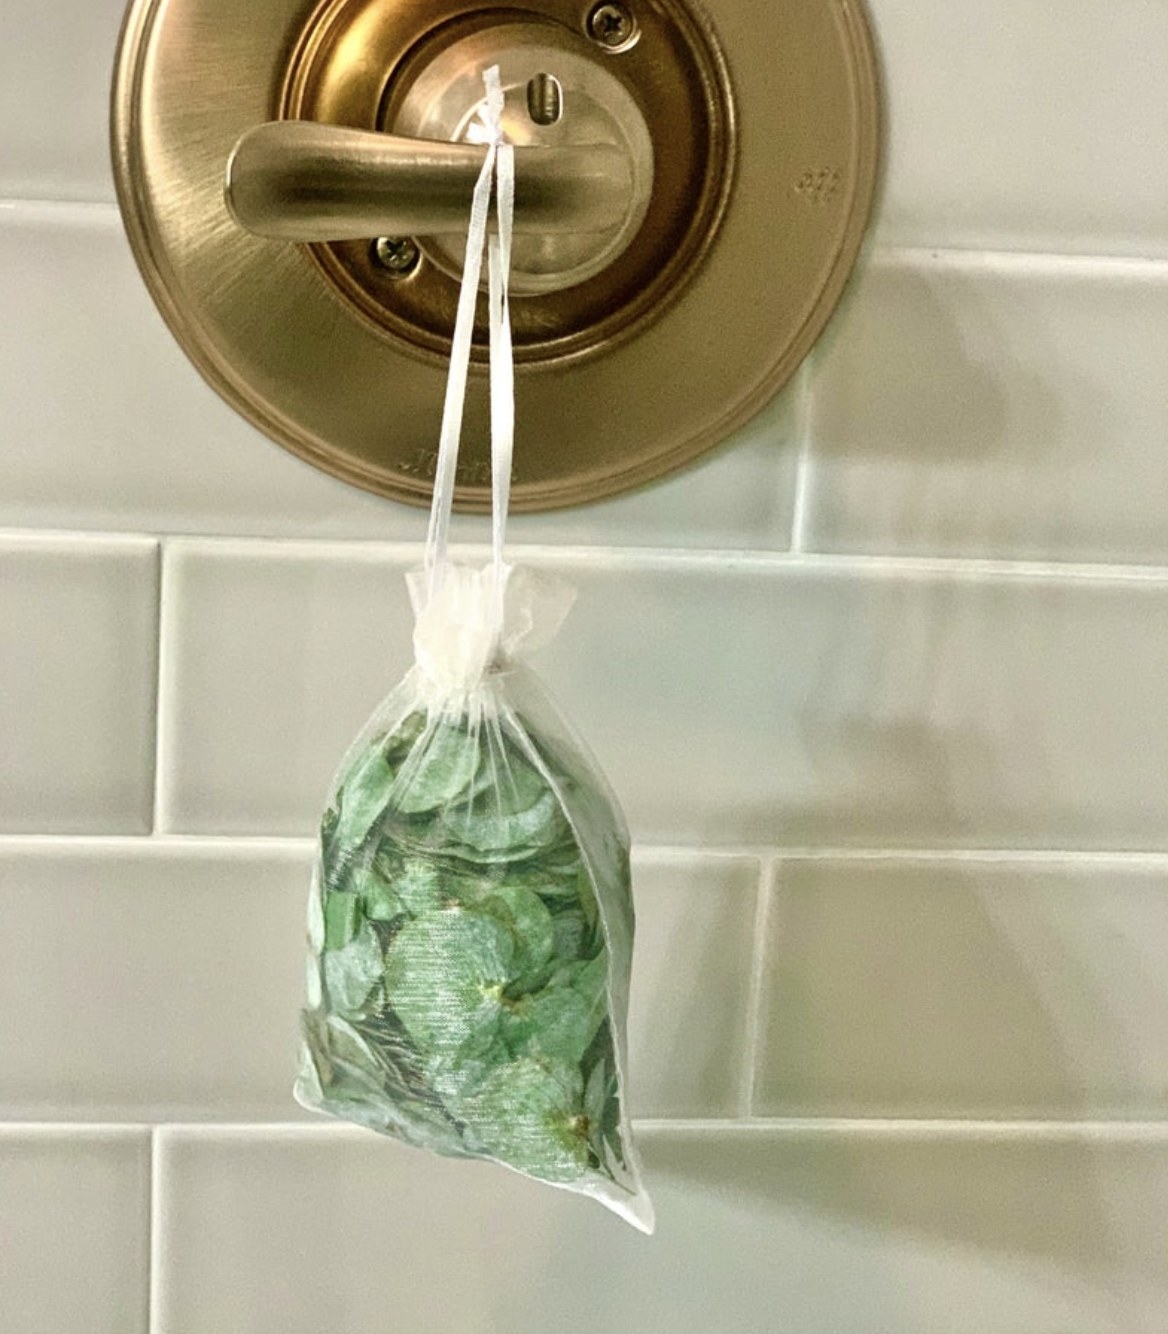 A pouch of eucalyptus leaves hanging from a bathroom handle